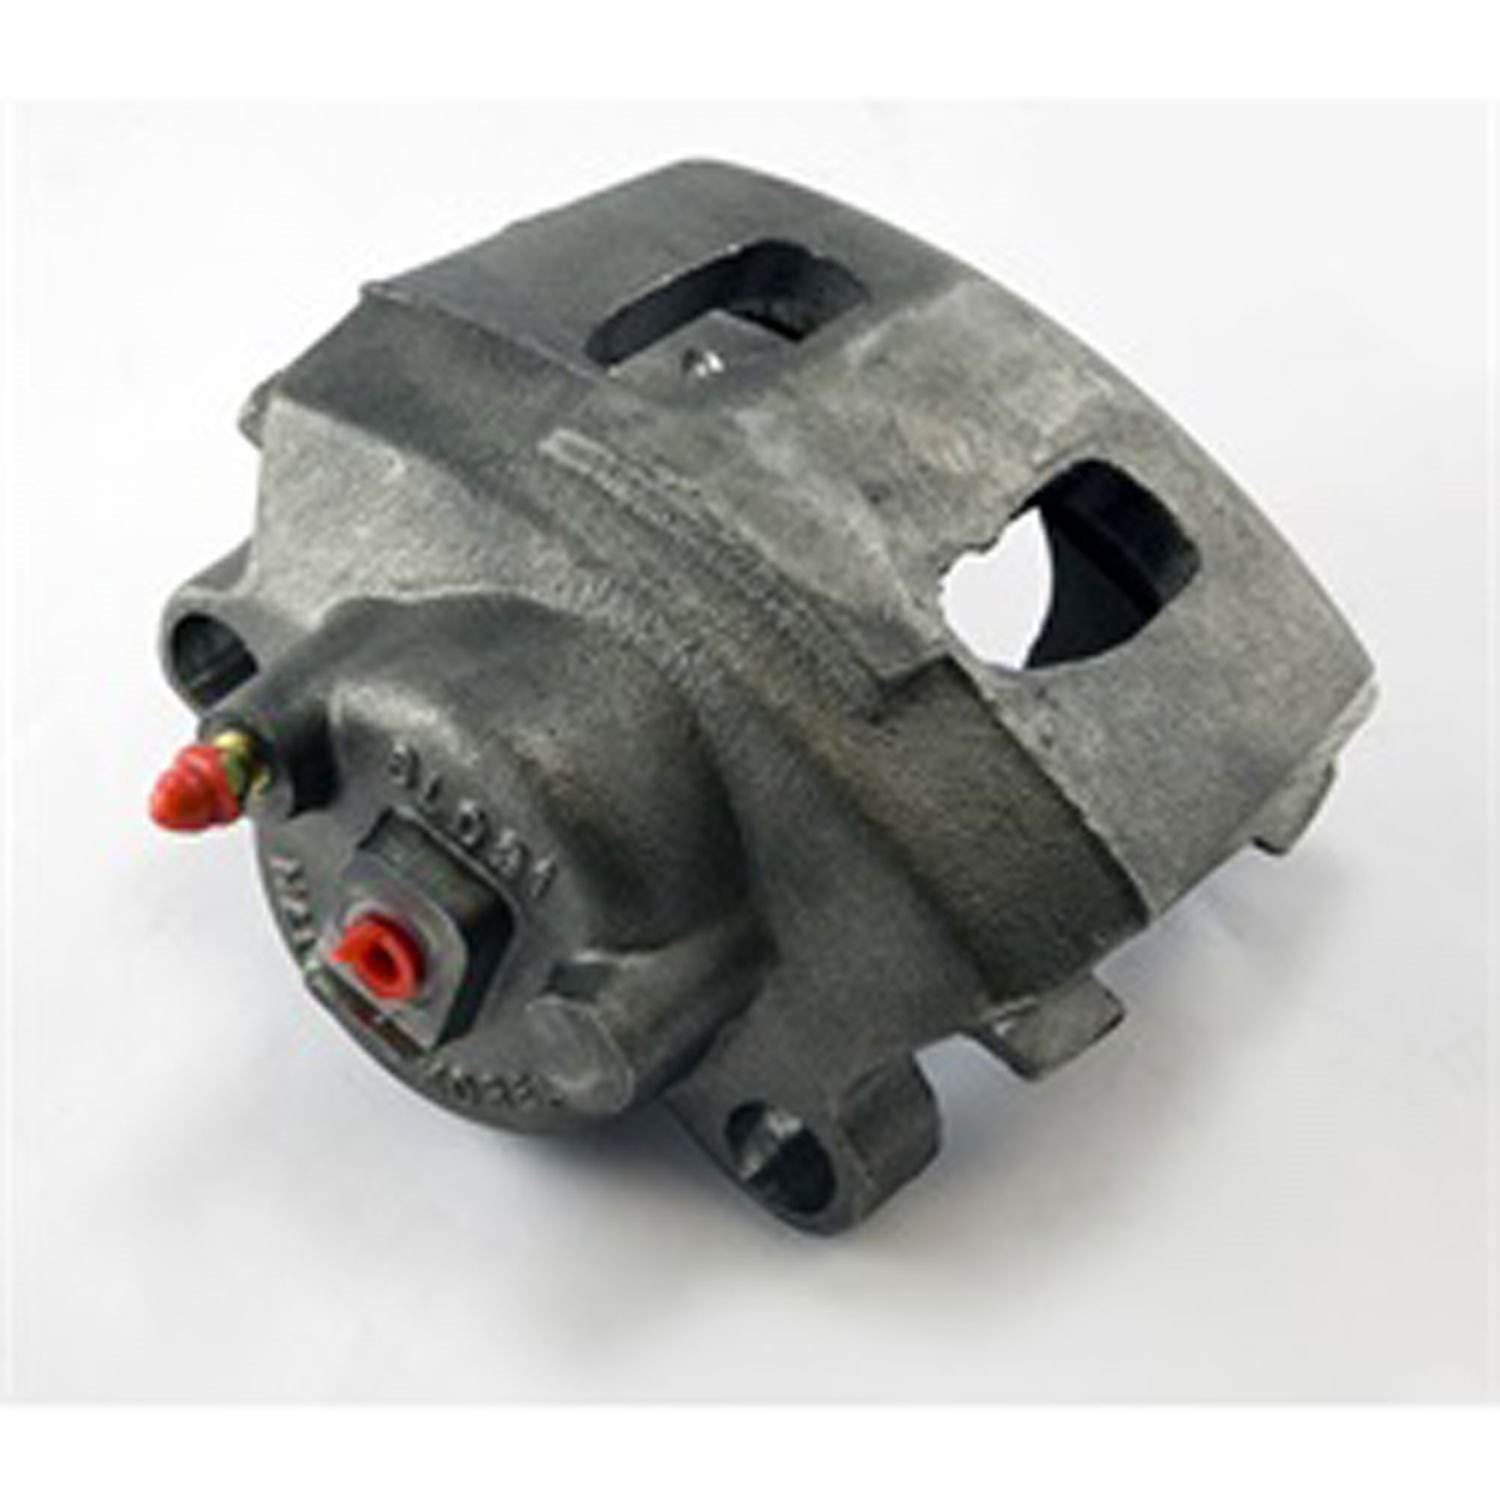 This left front disc brake caliper from Omix-ADA fits 90-06 Jeep Wranglers 90-01 4WD Cherokees and 93-98 Grand Cherokees.